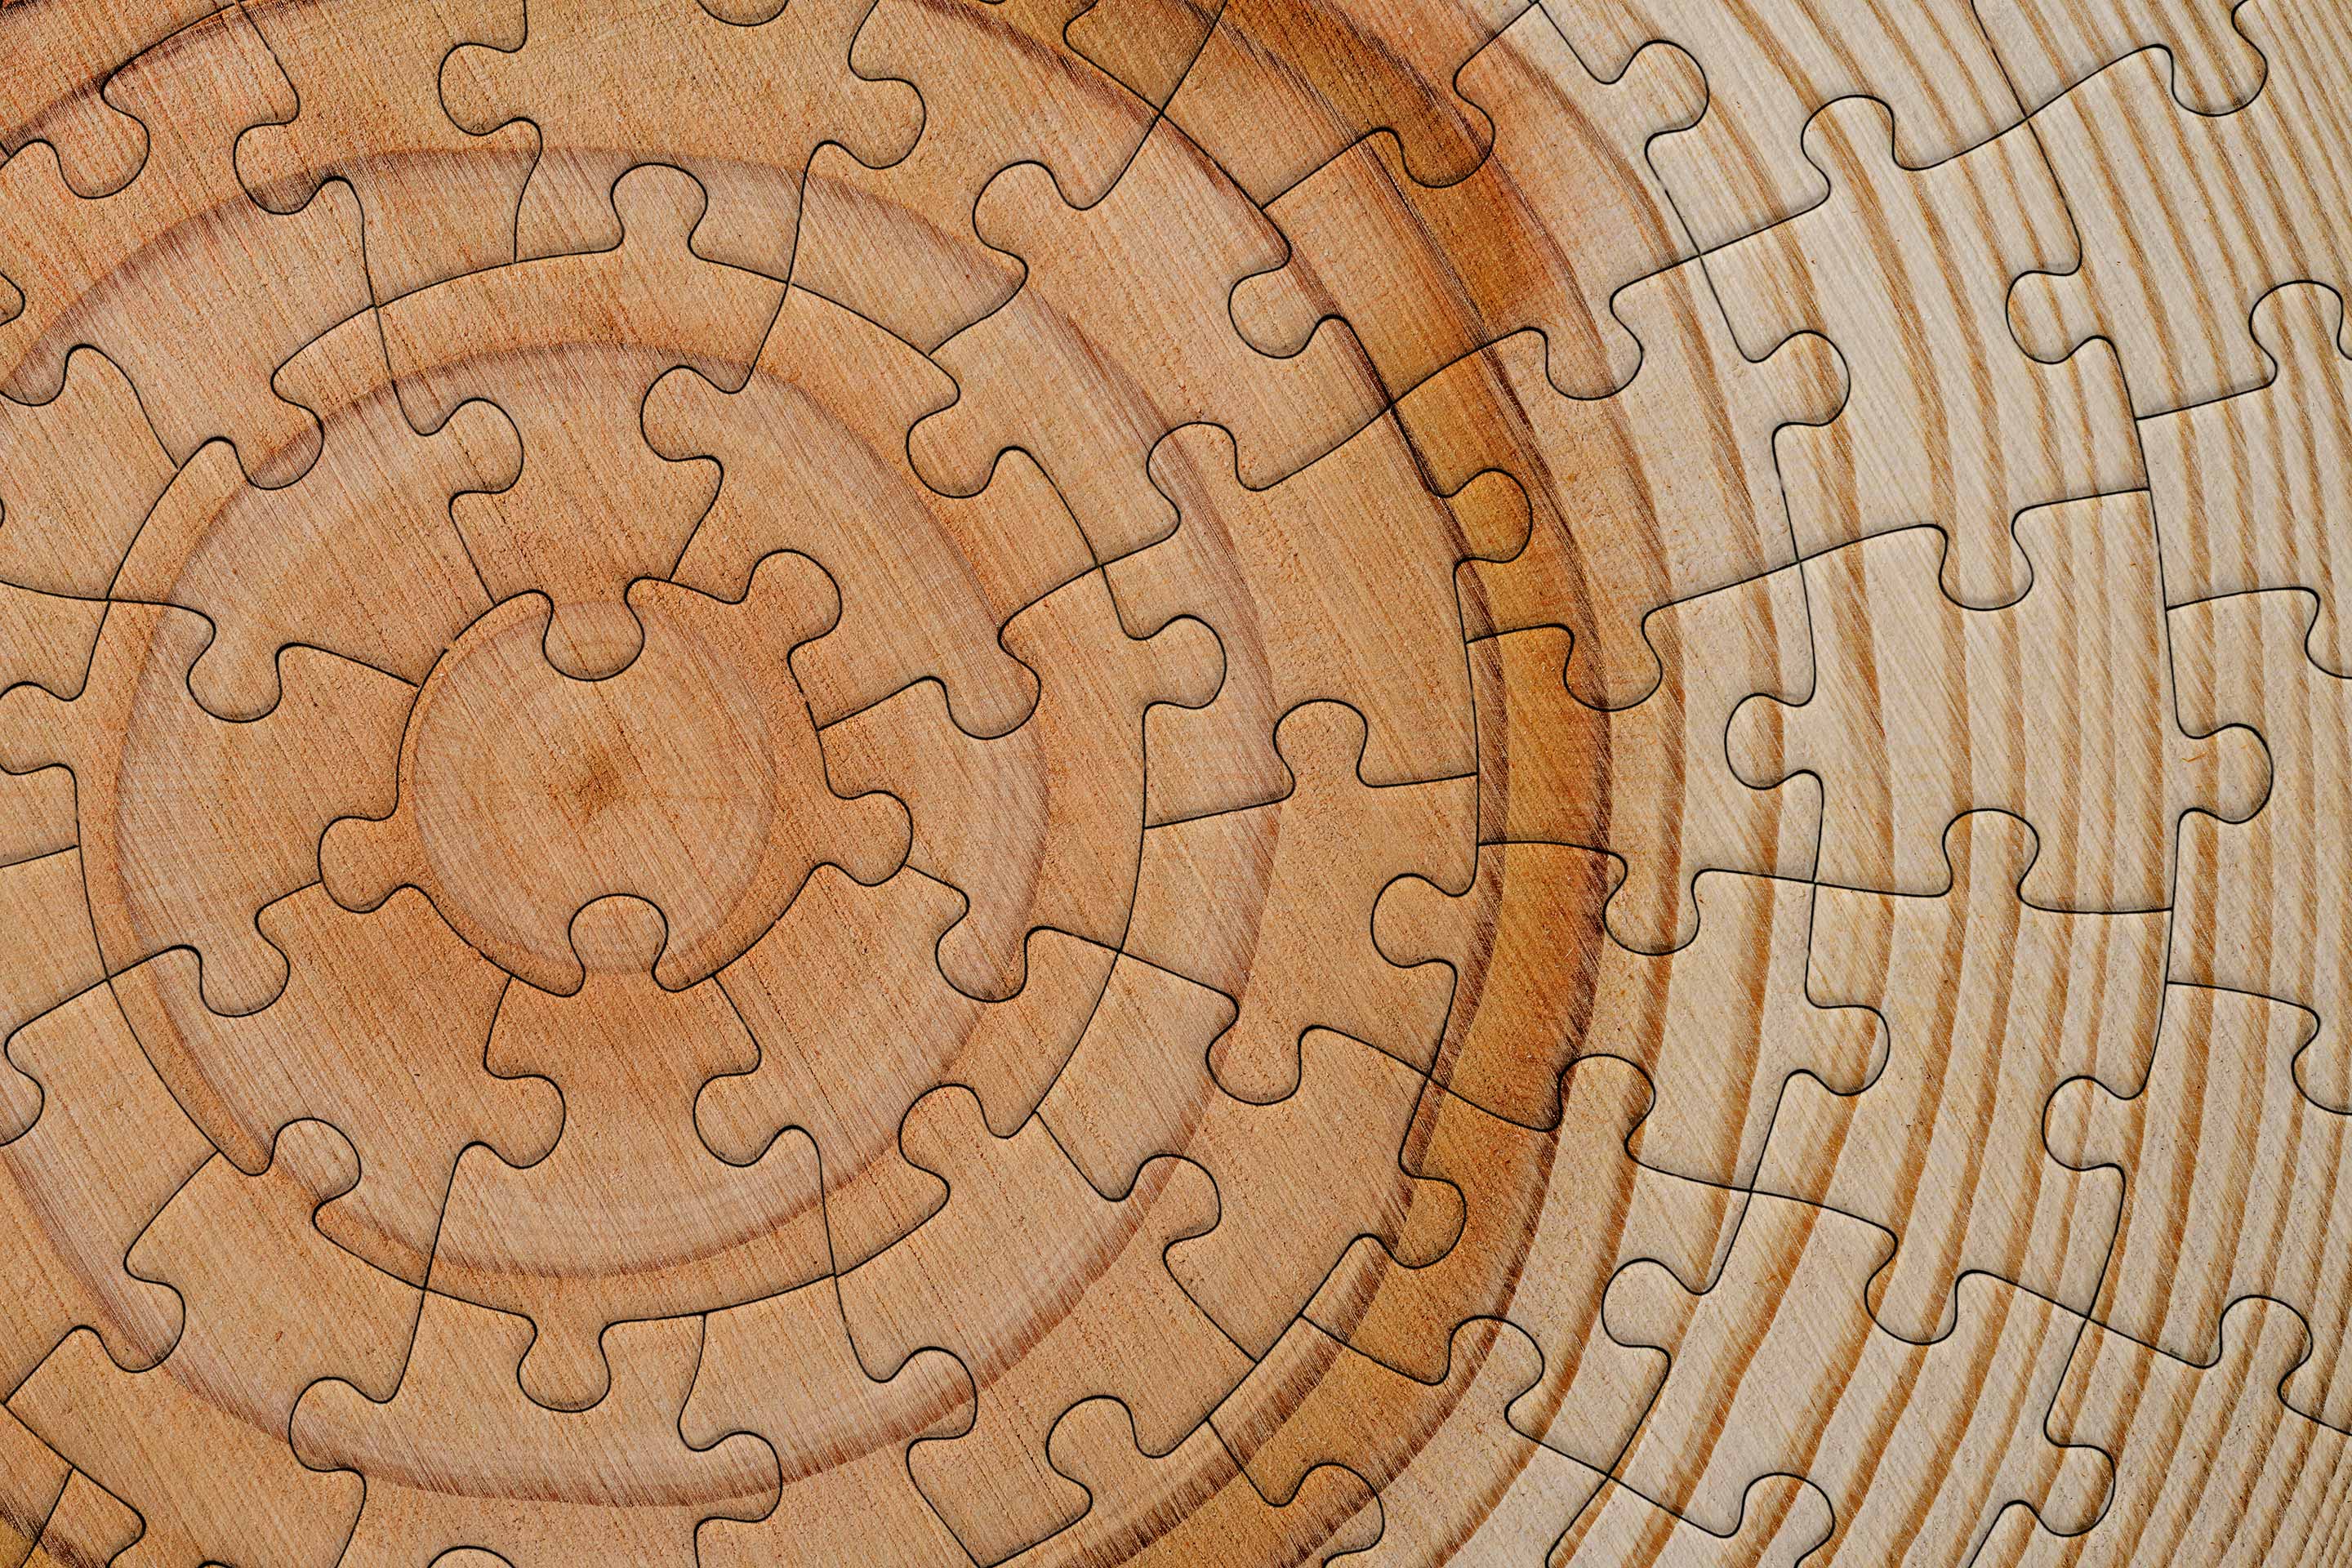 Circular puzzle pieces connect to form the rings of a tree stump, we are all connected.